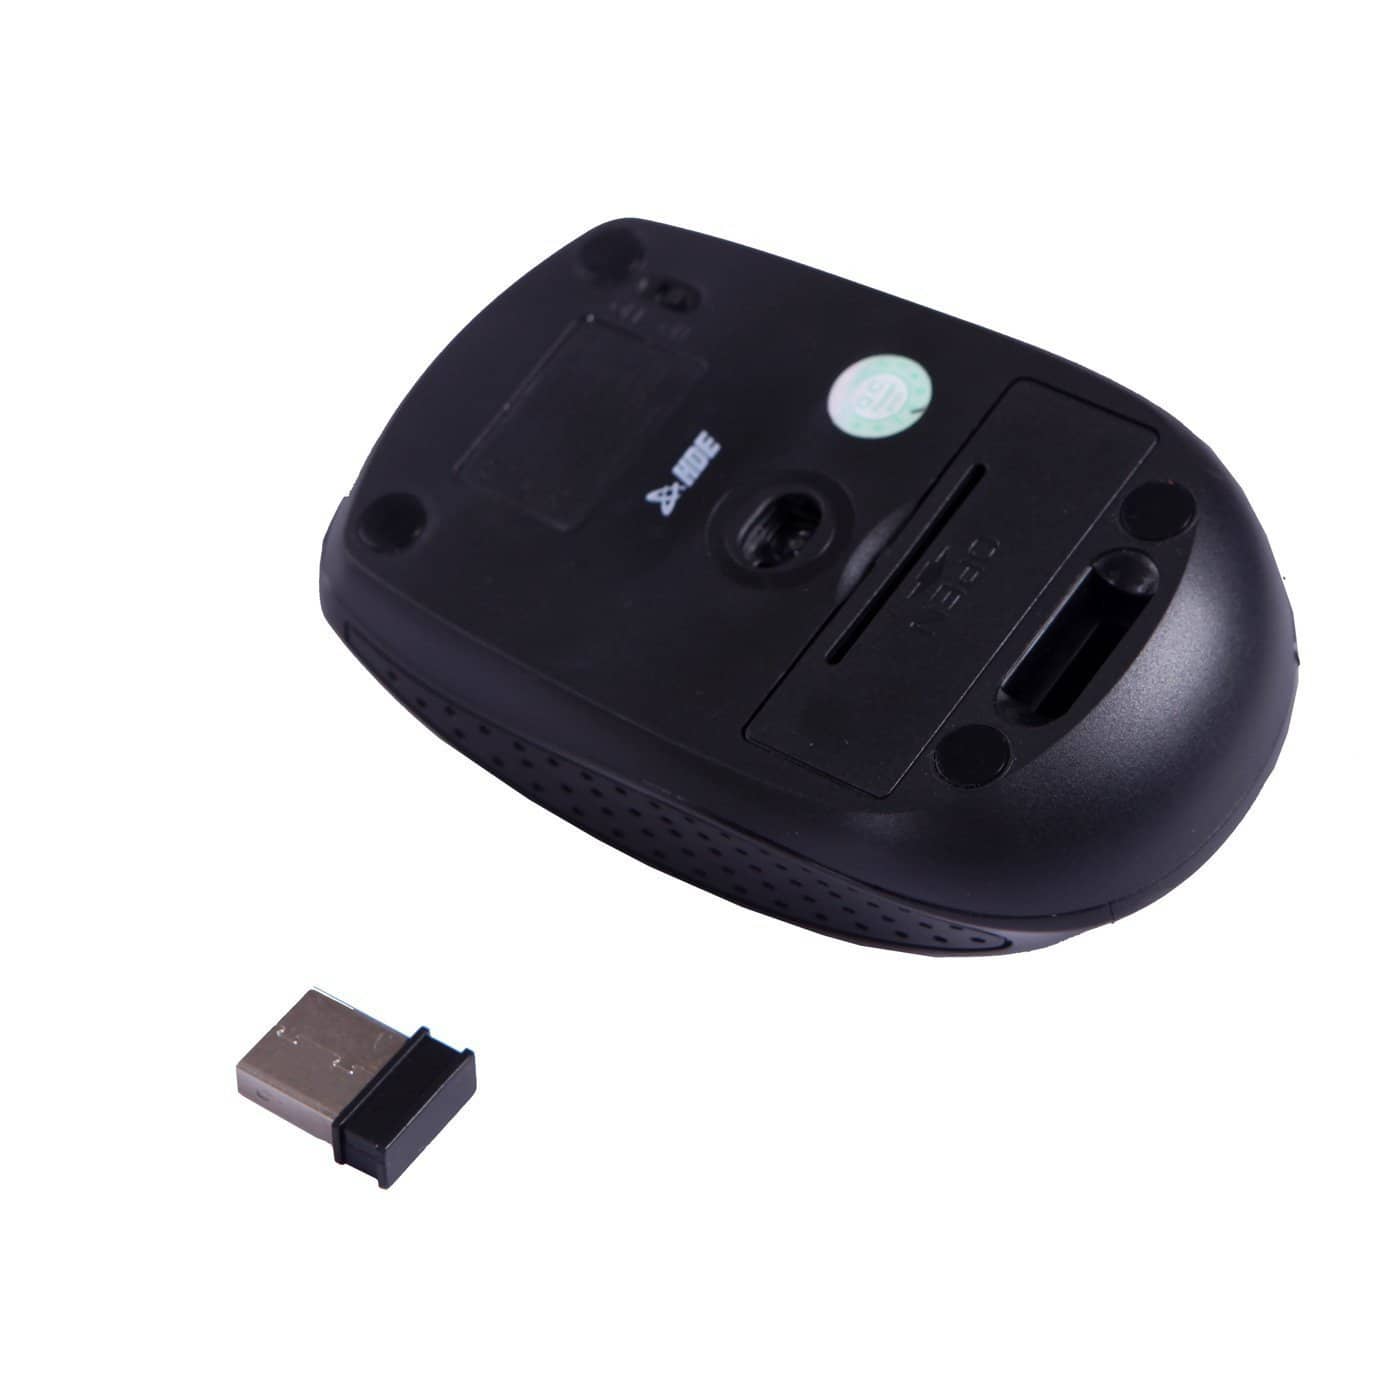 HDE Wireless Optical Computer Mouse 2.4 GHz - Black